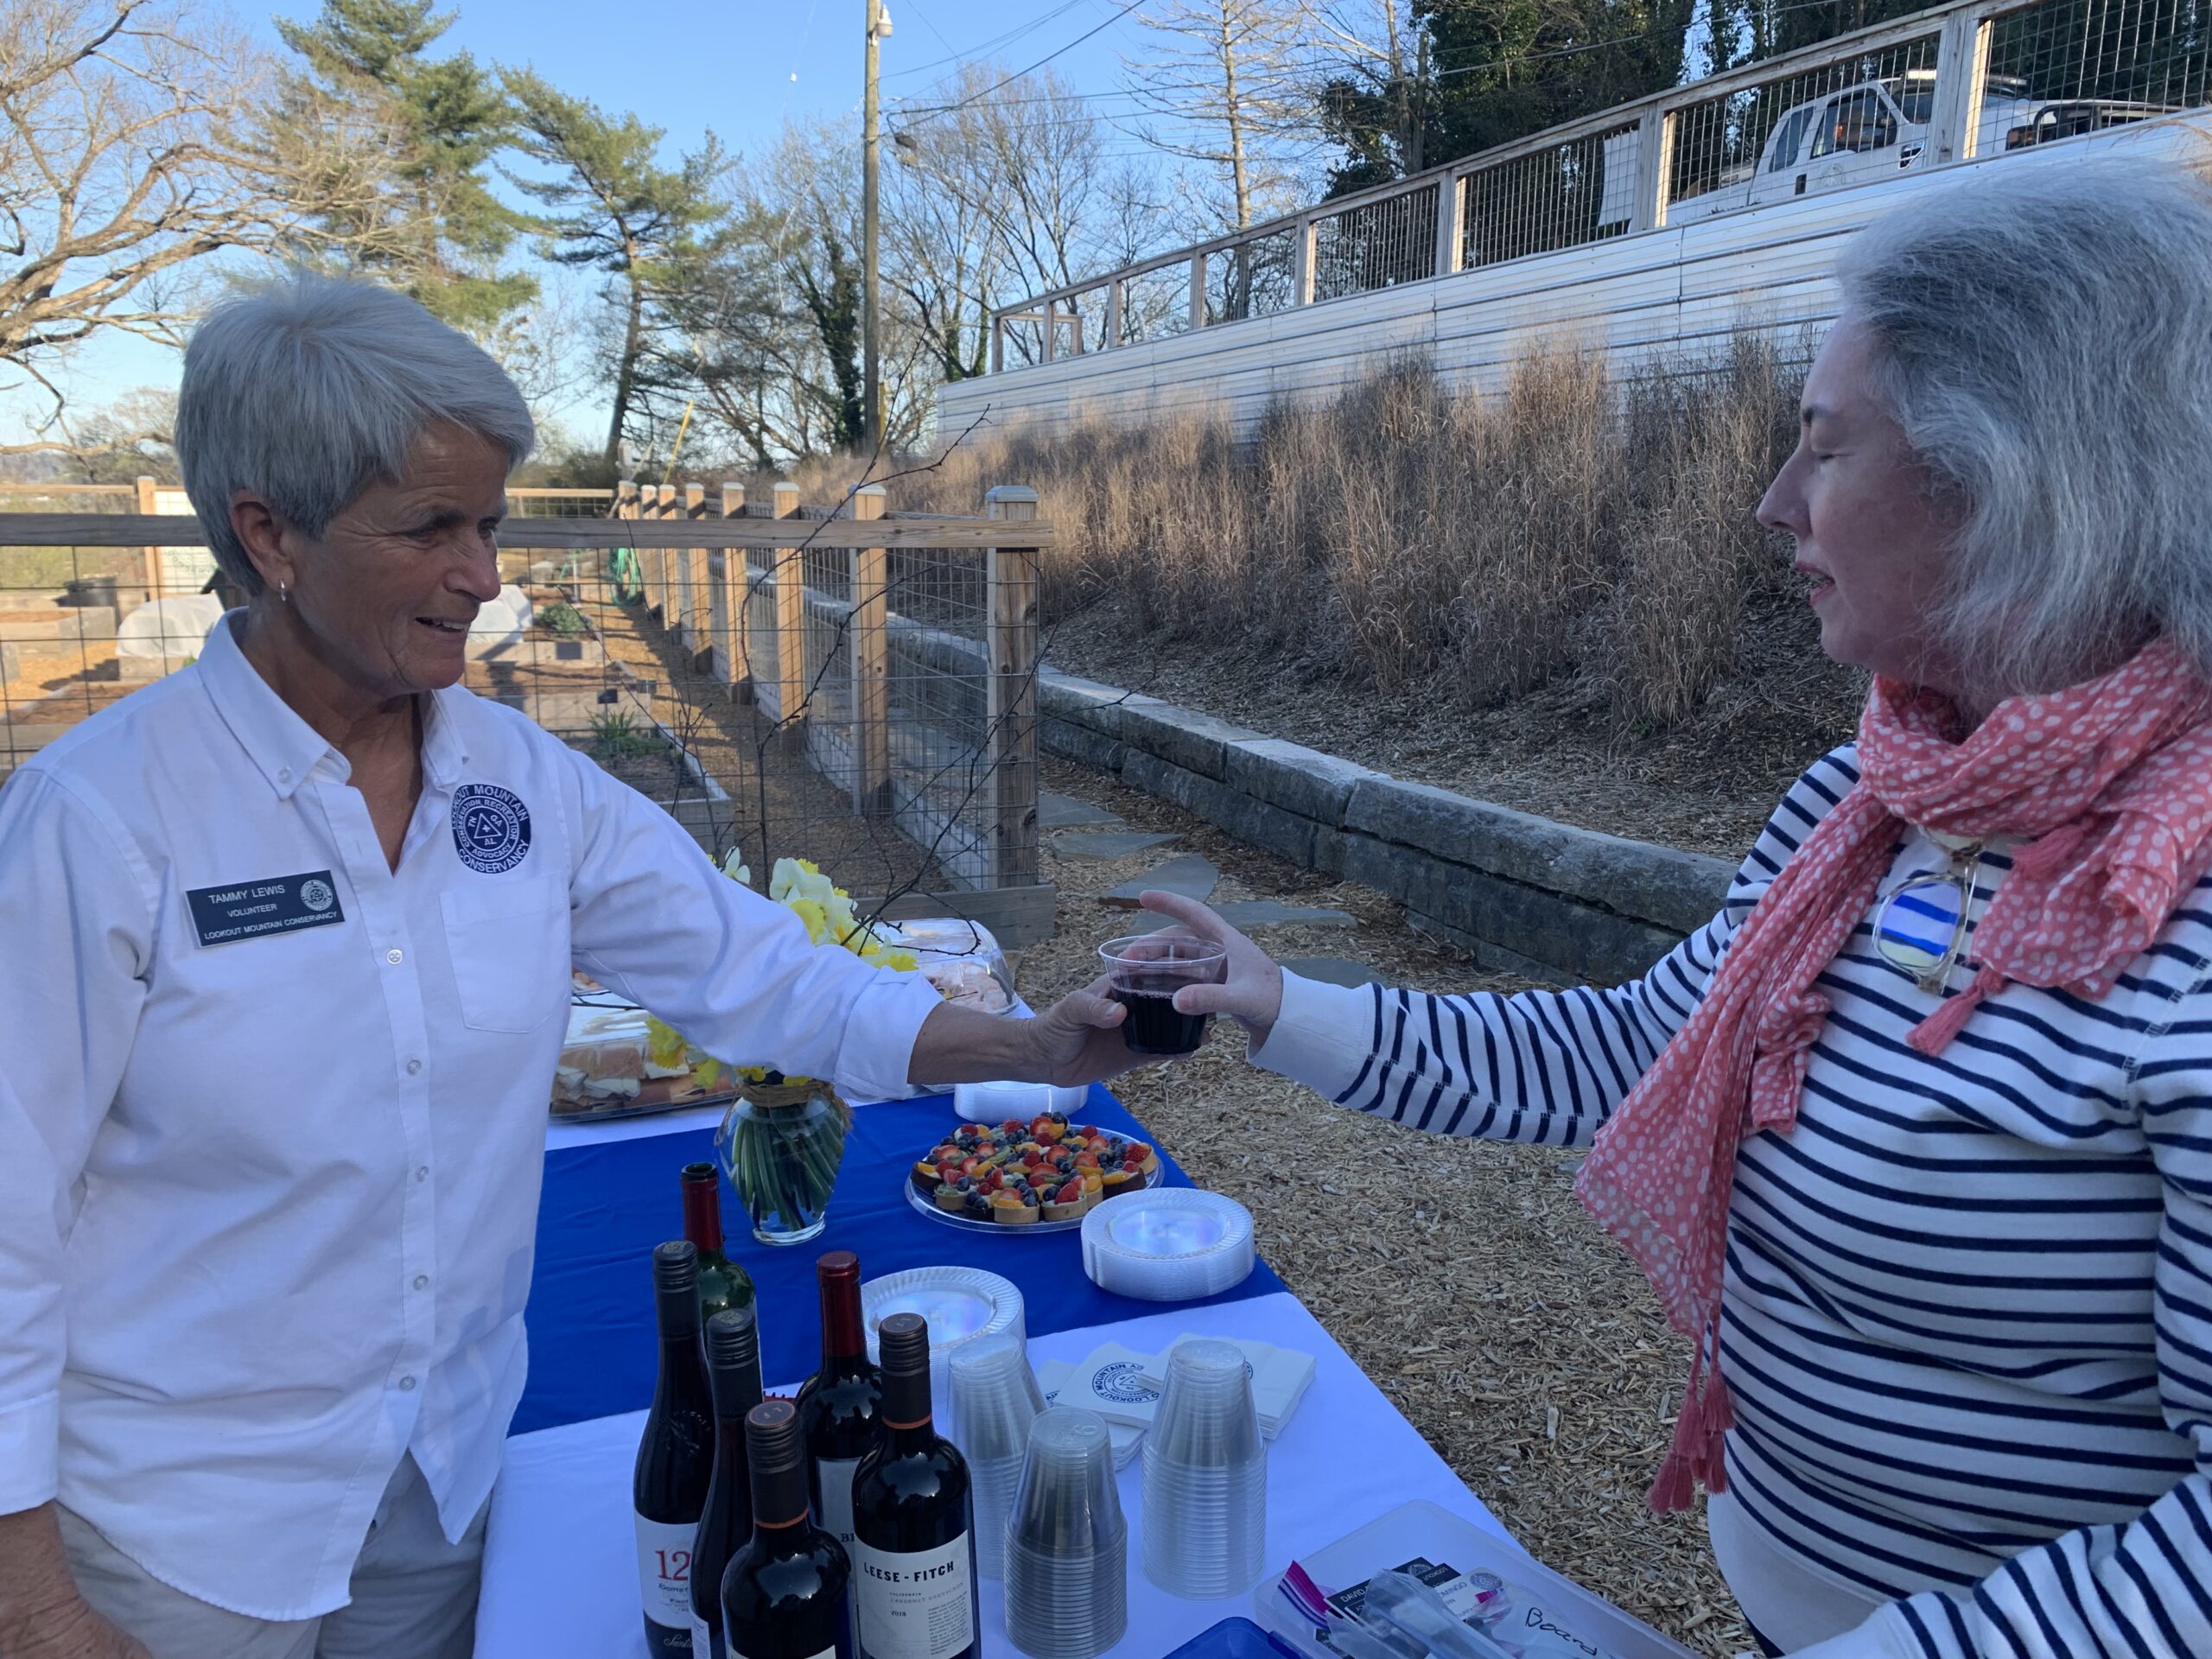 Tammy serving board member Mary Anne a glass of wine